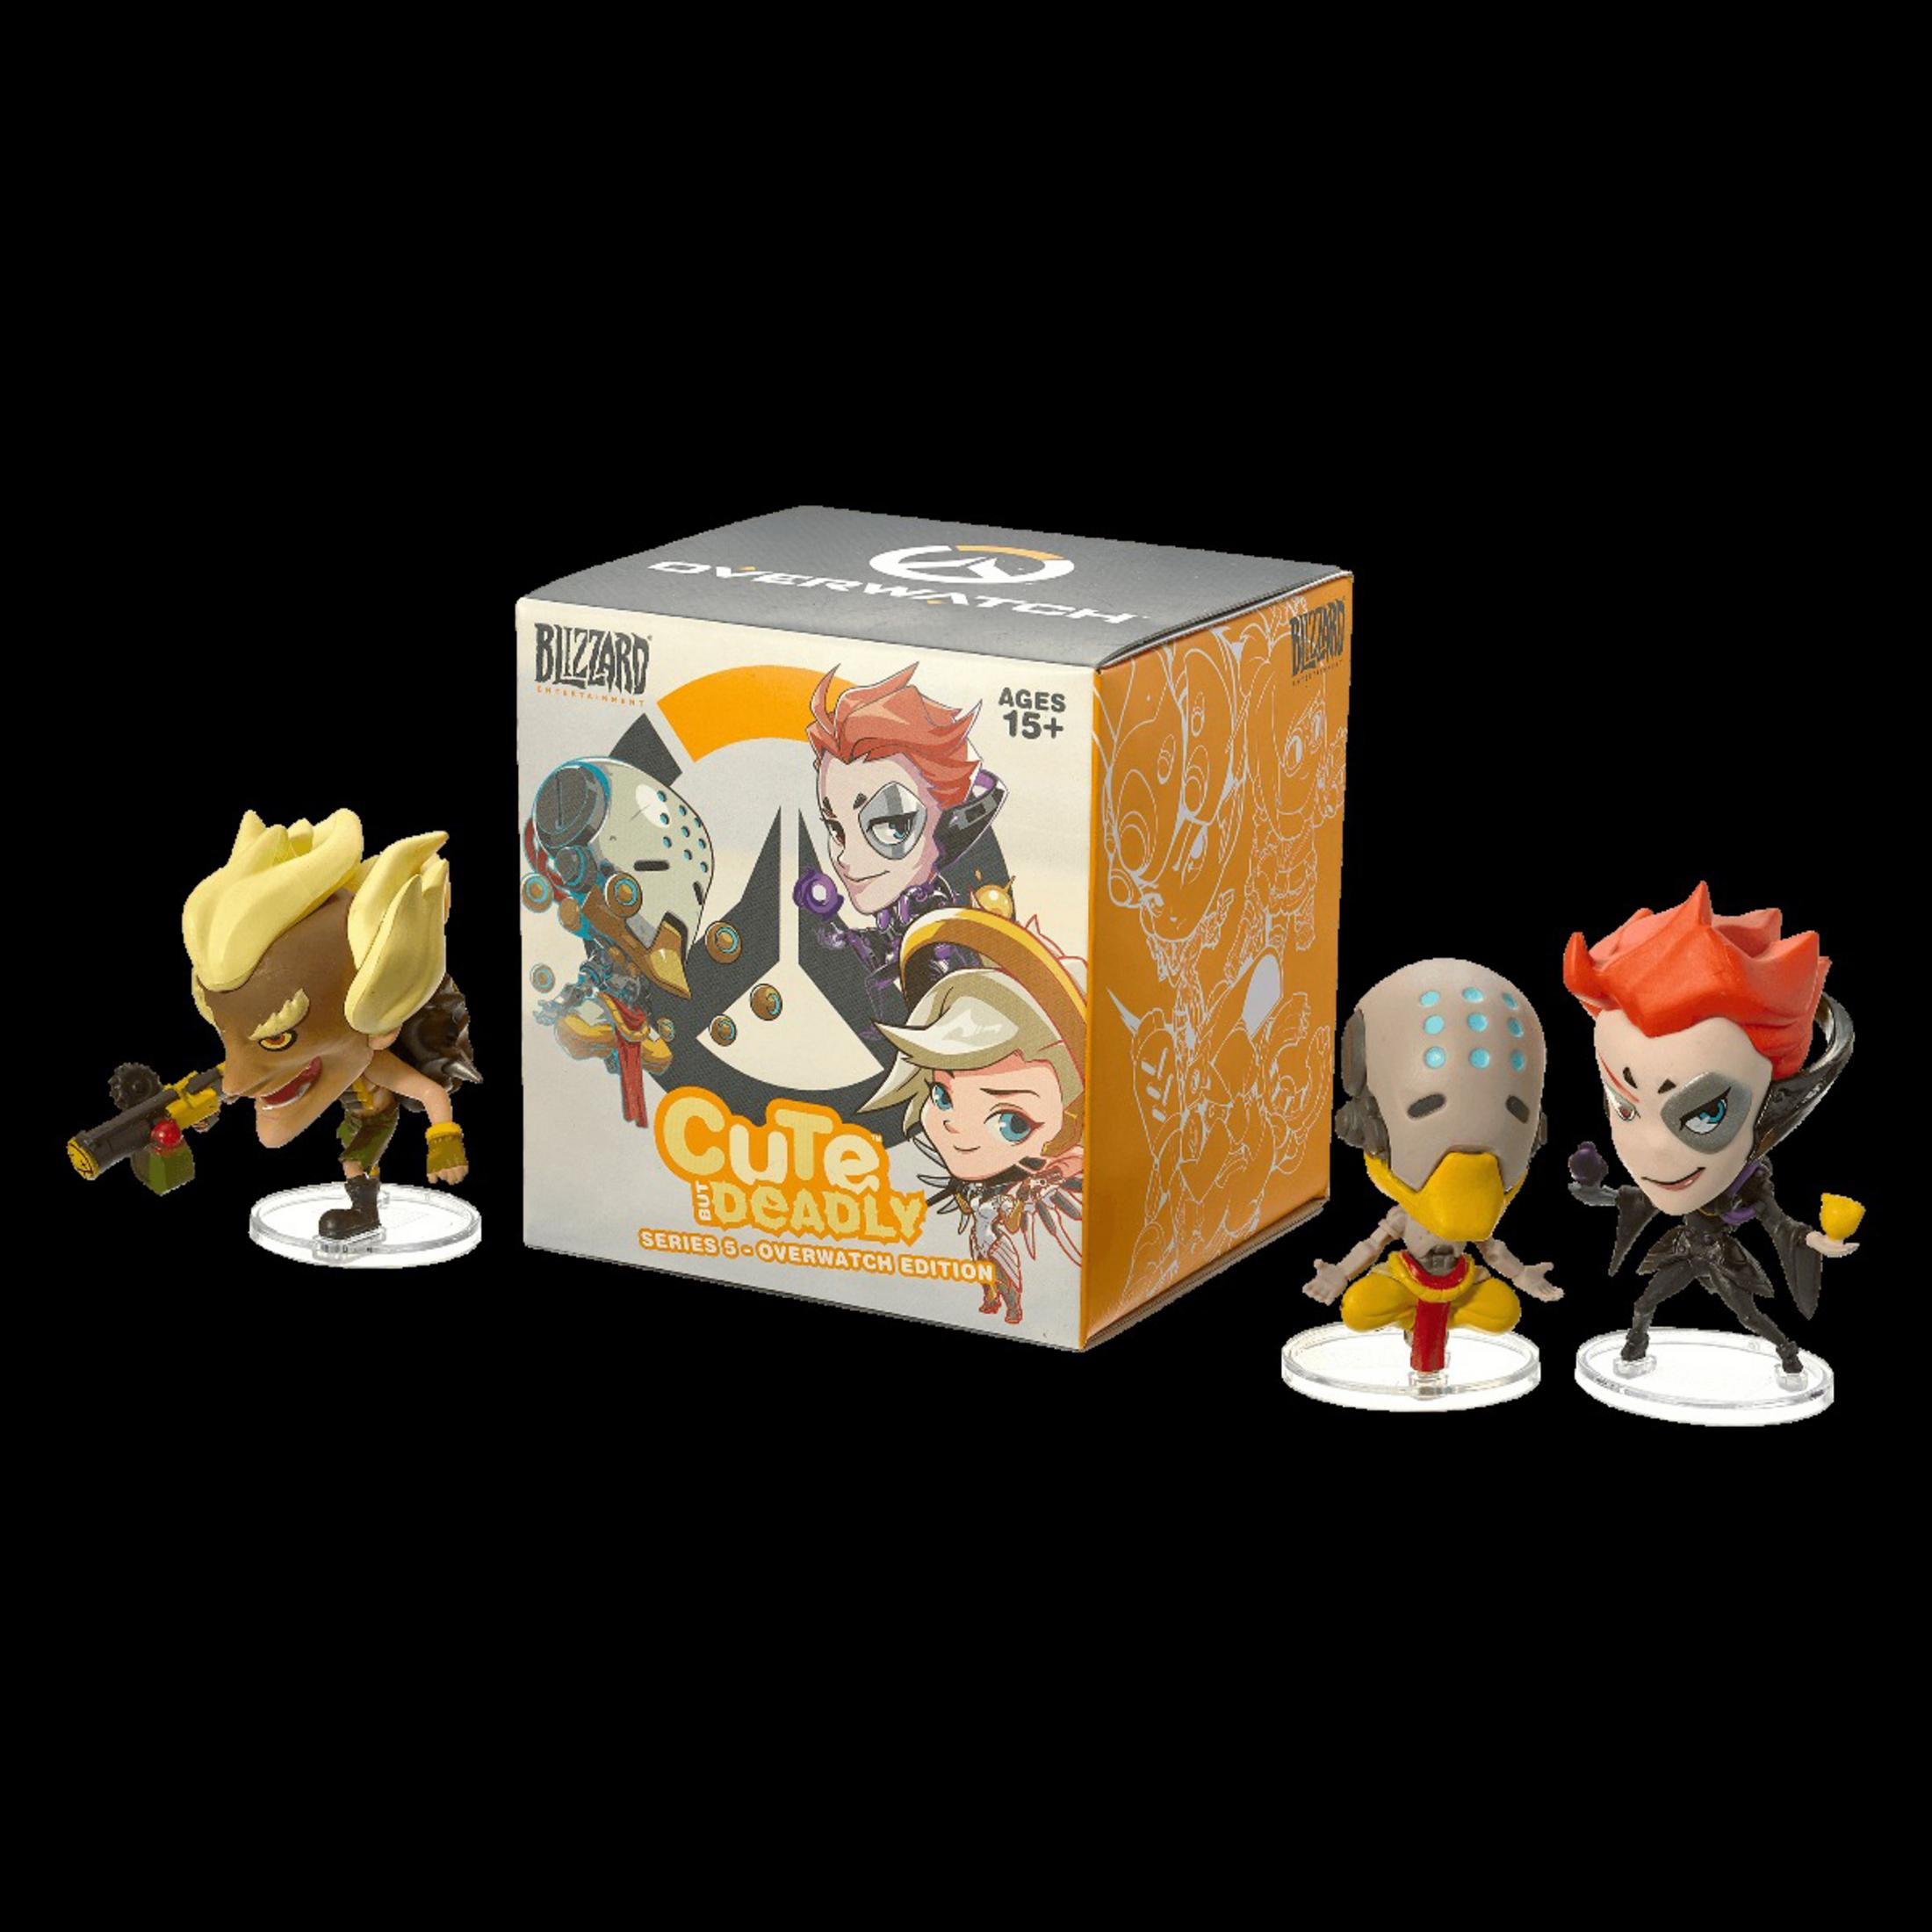 S5 CUTE BLIND OVERWATCH DEADLY BOX BUT